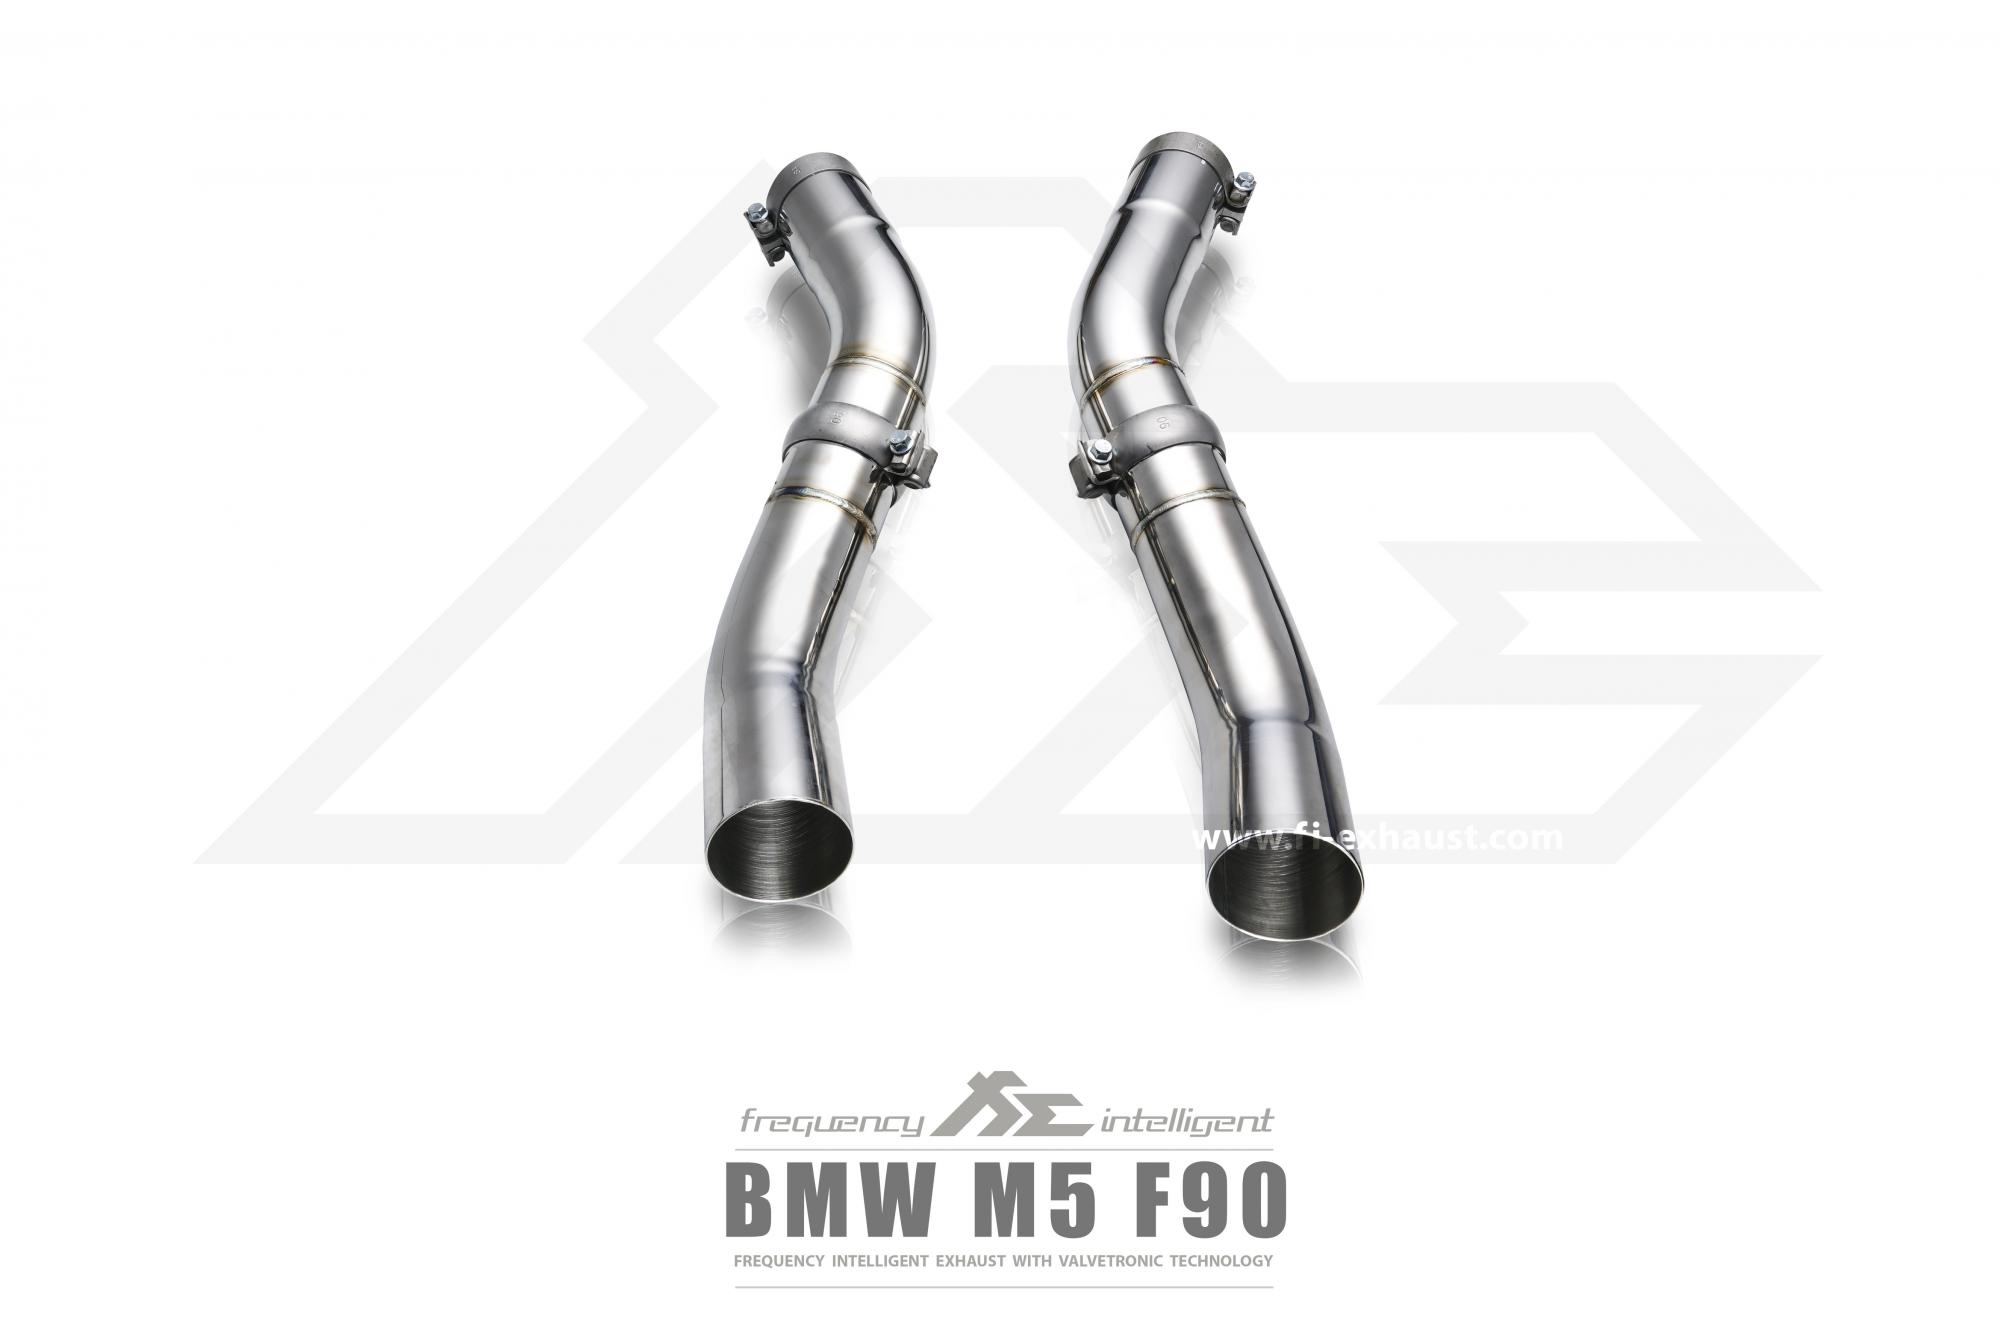 FI Valvetronic Sport Exhaust System BMW F90 M5/M5 Competition 2018+